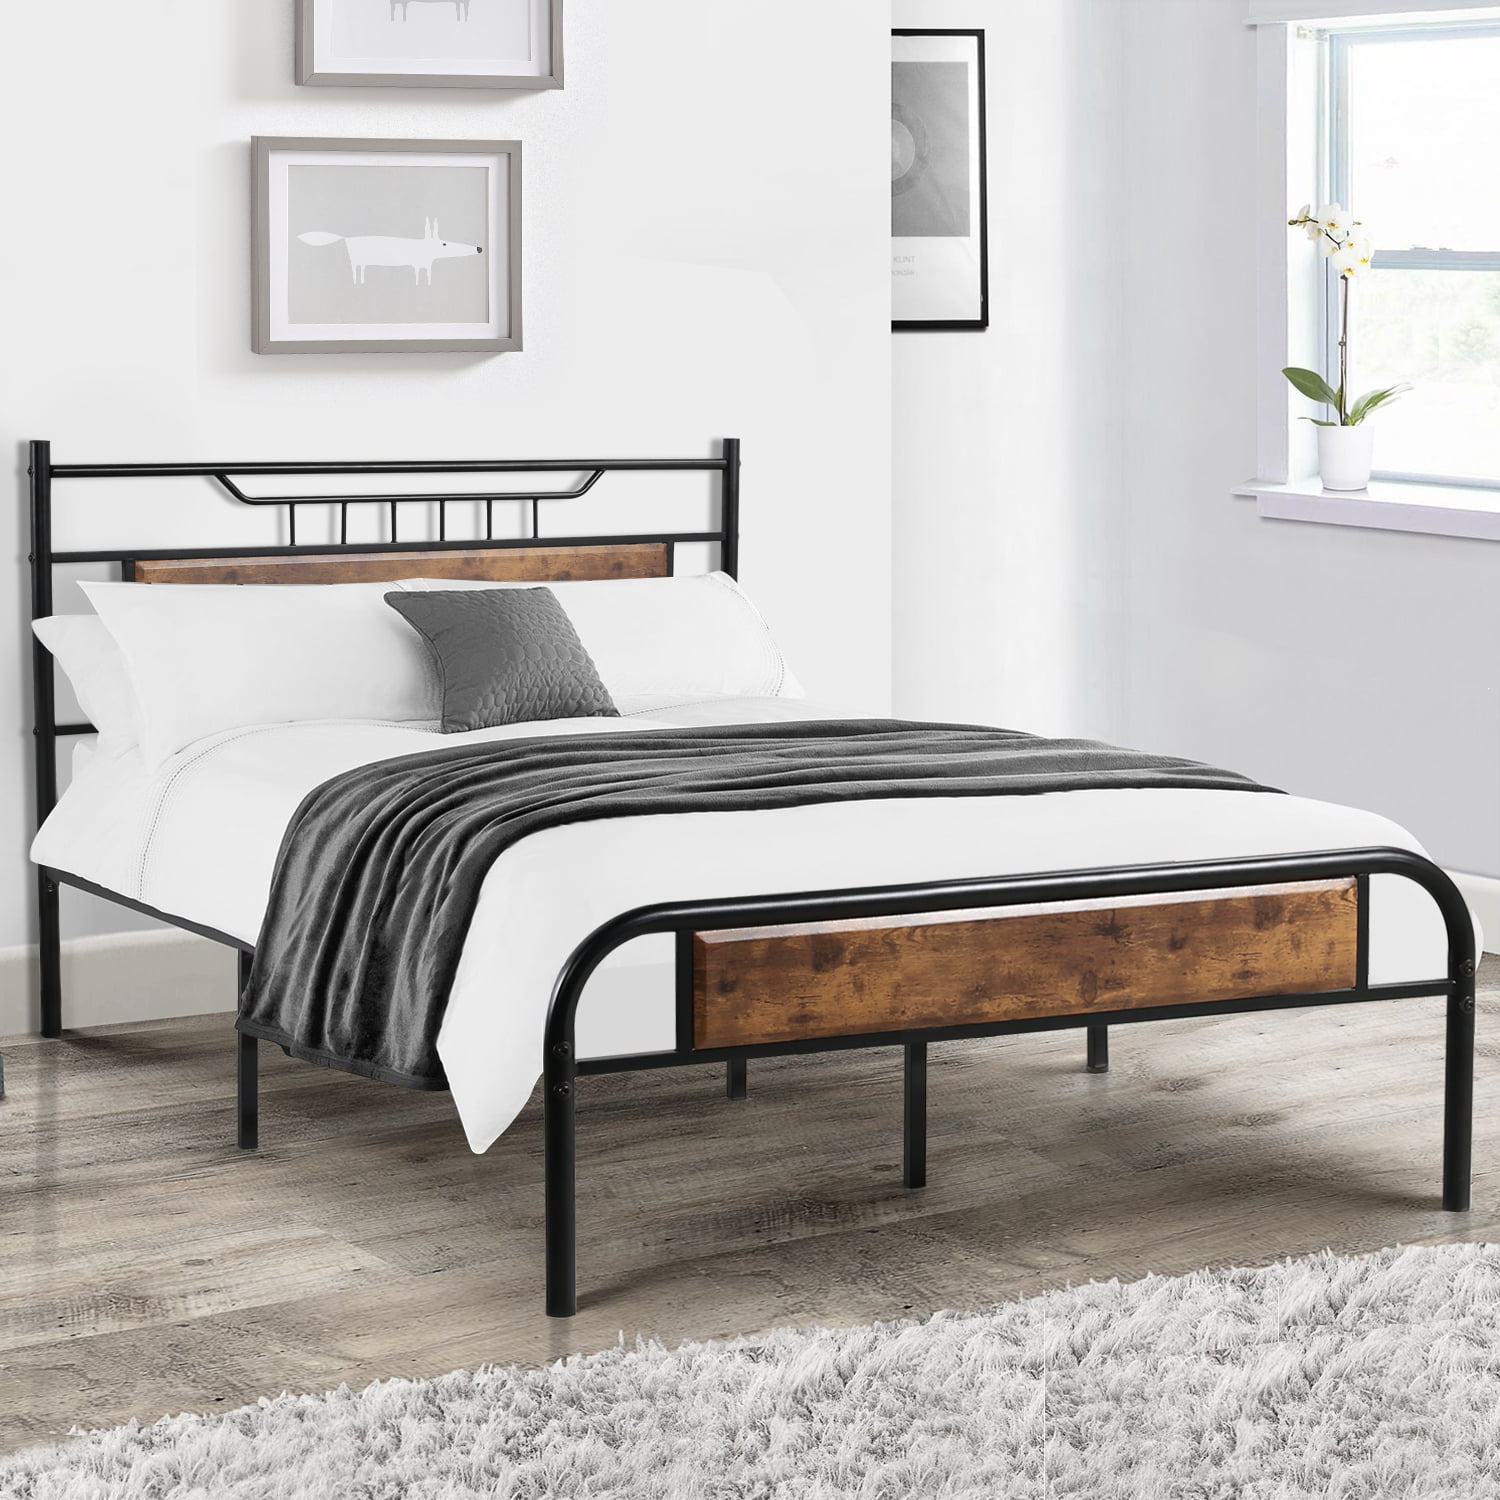 VECELO Rustic Queen Size Metal and Wood Platform Bed Frame with Wooden